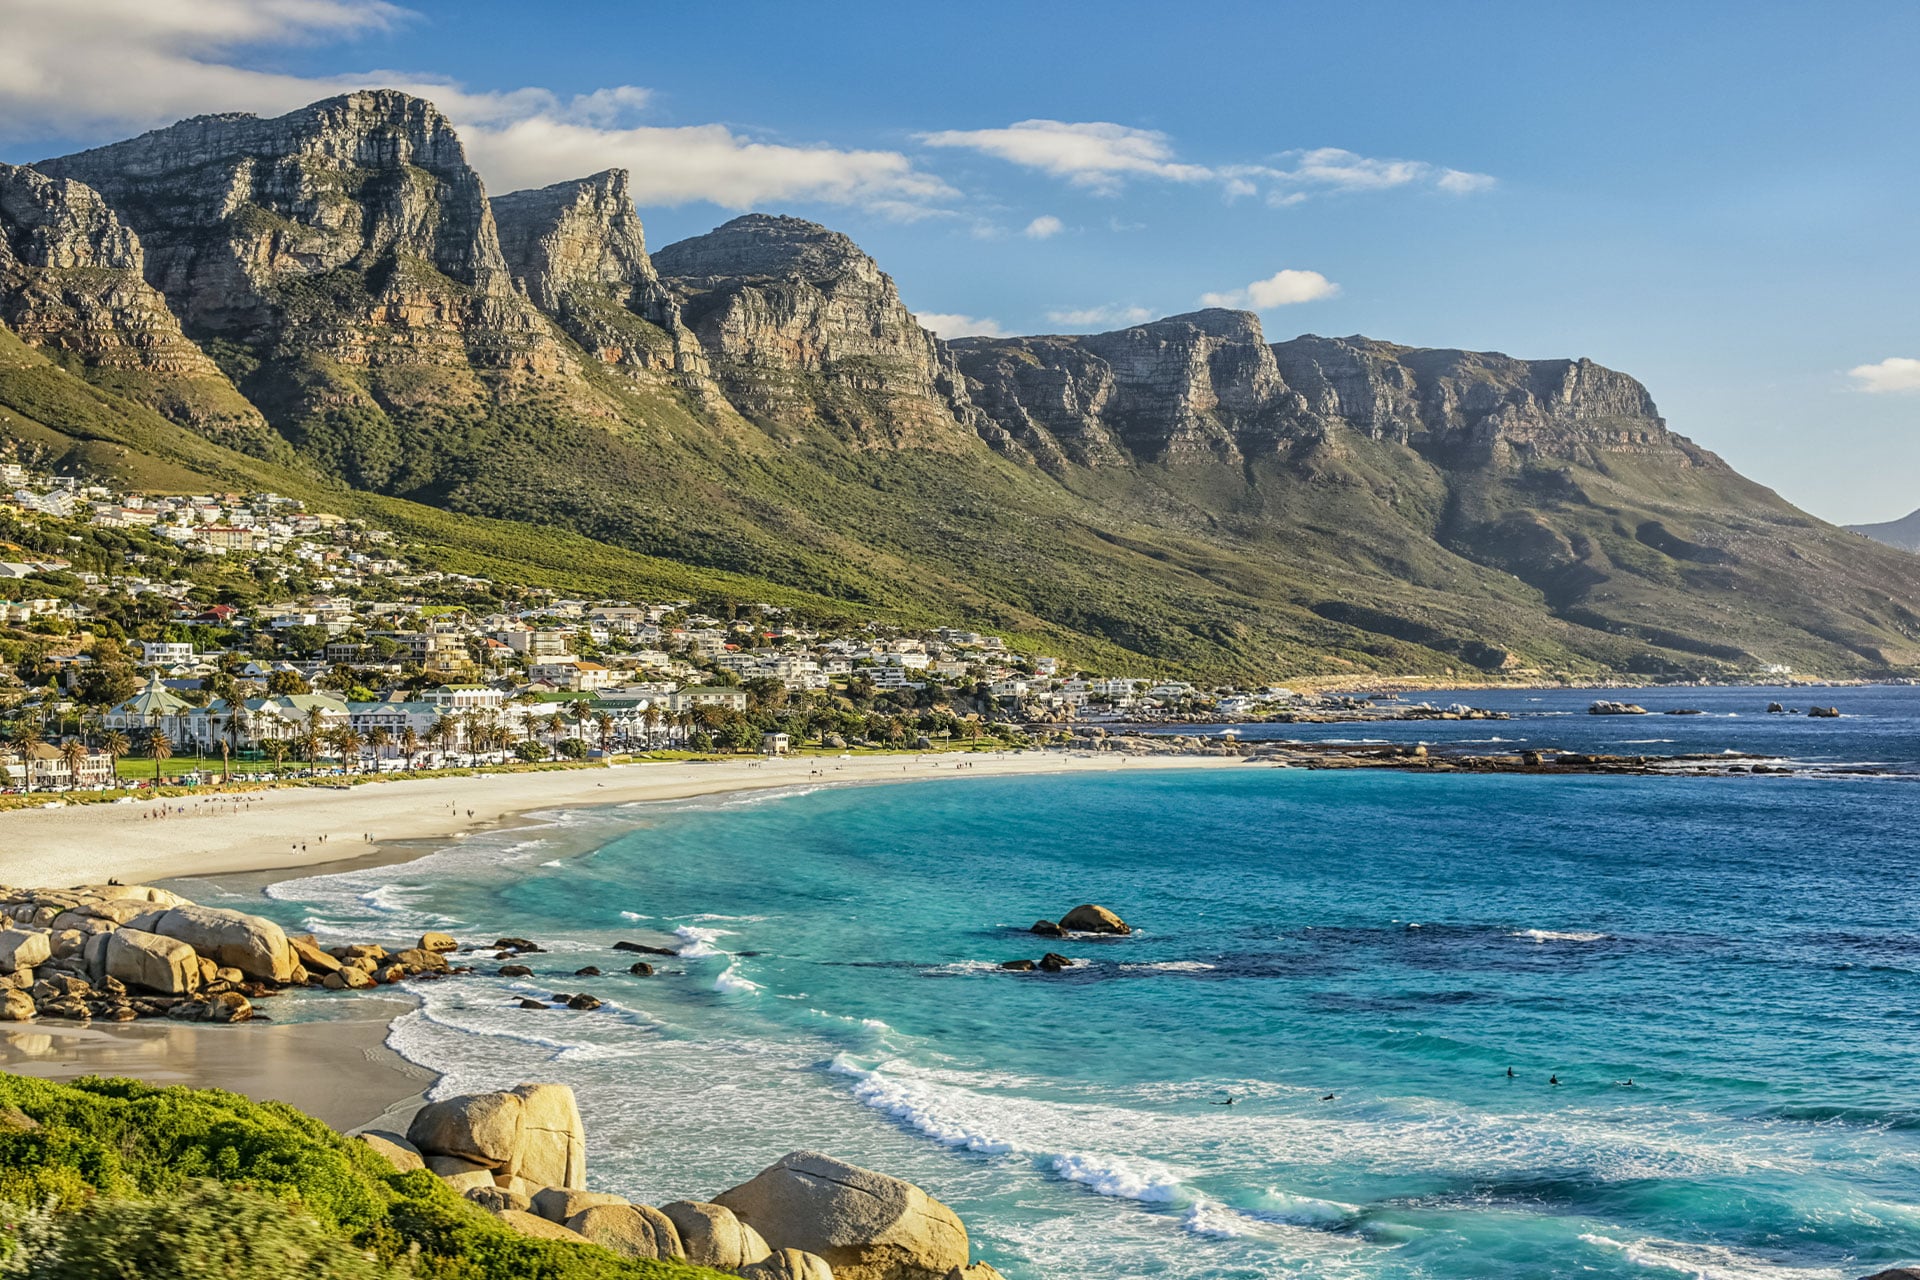 Cape Town’s Camps Bay beach with the Twelve Apostles of Table Mountain in the background.